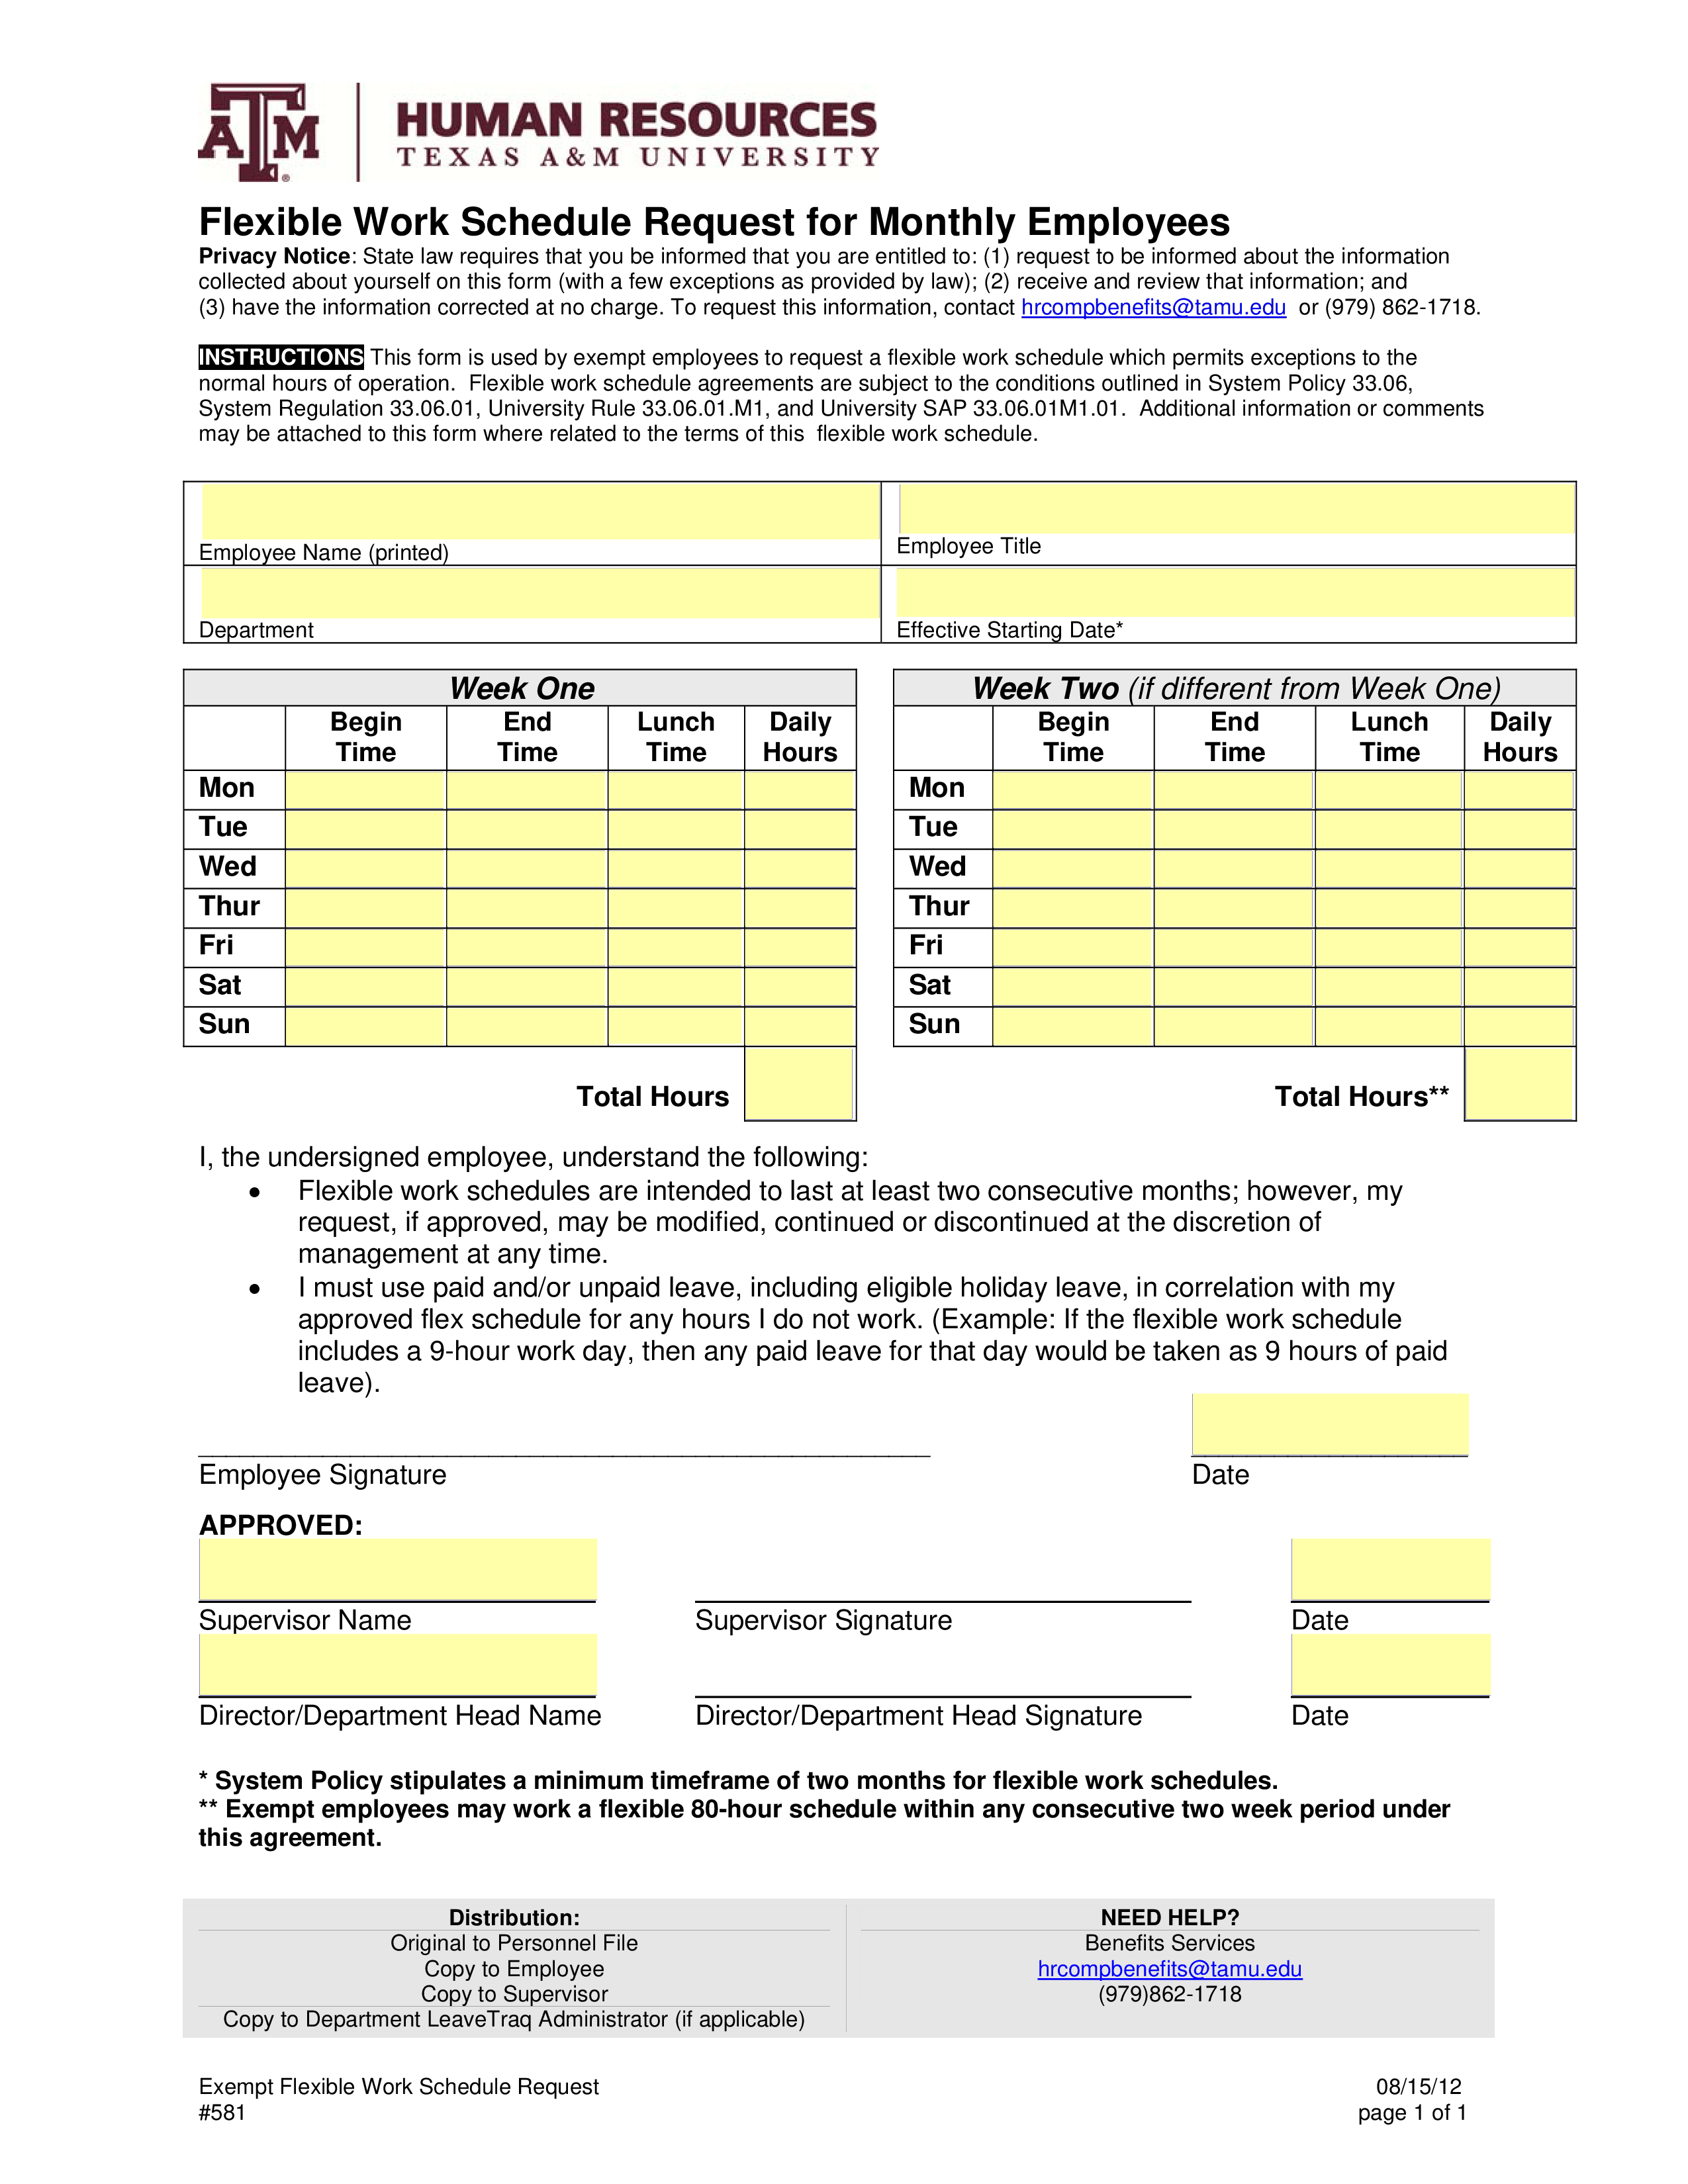 Employee Schedule Monthly basis main image